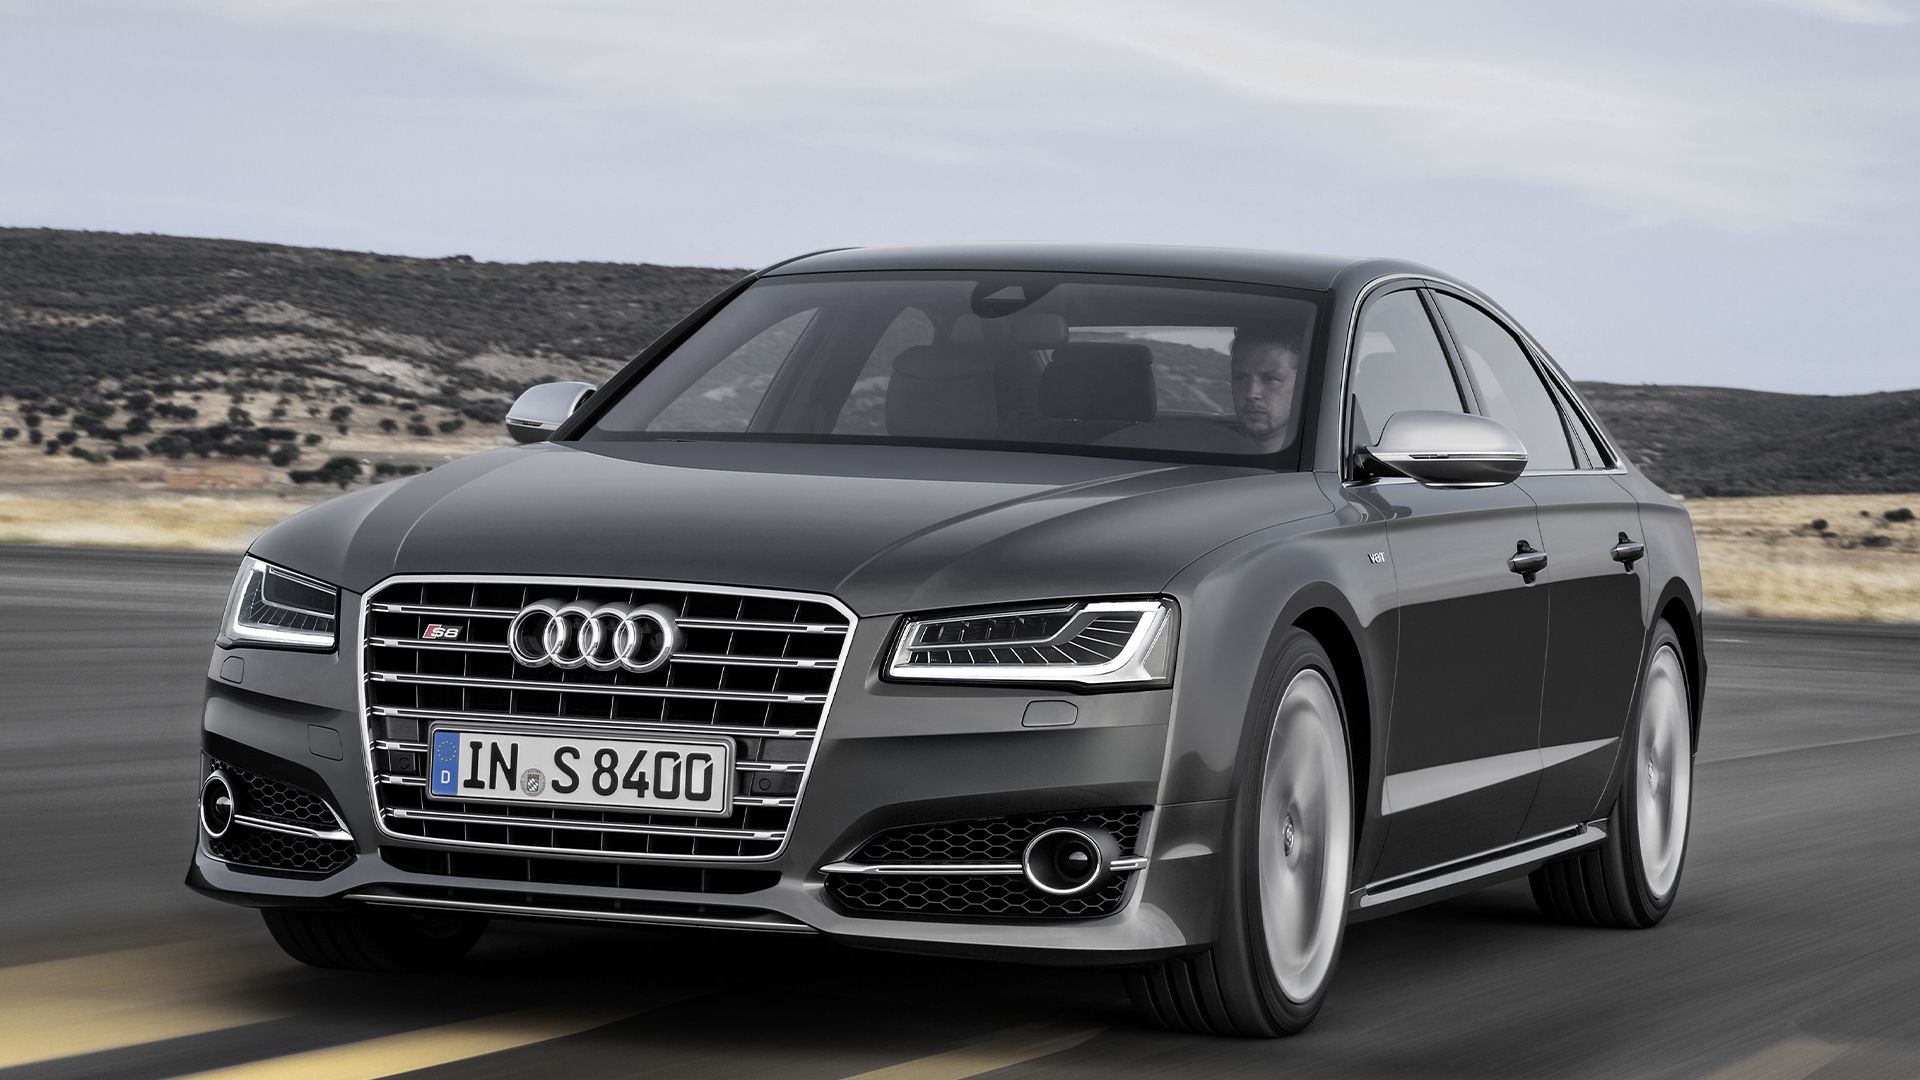 silver 2013 Audi S8 parked